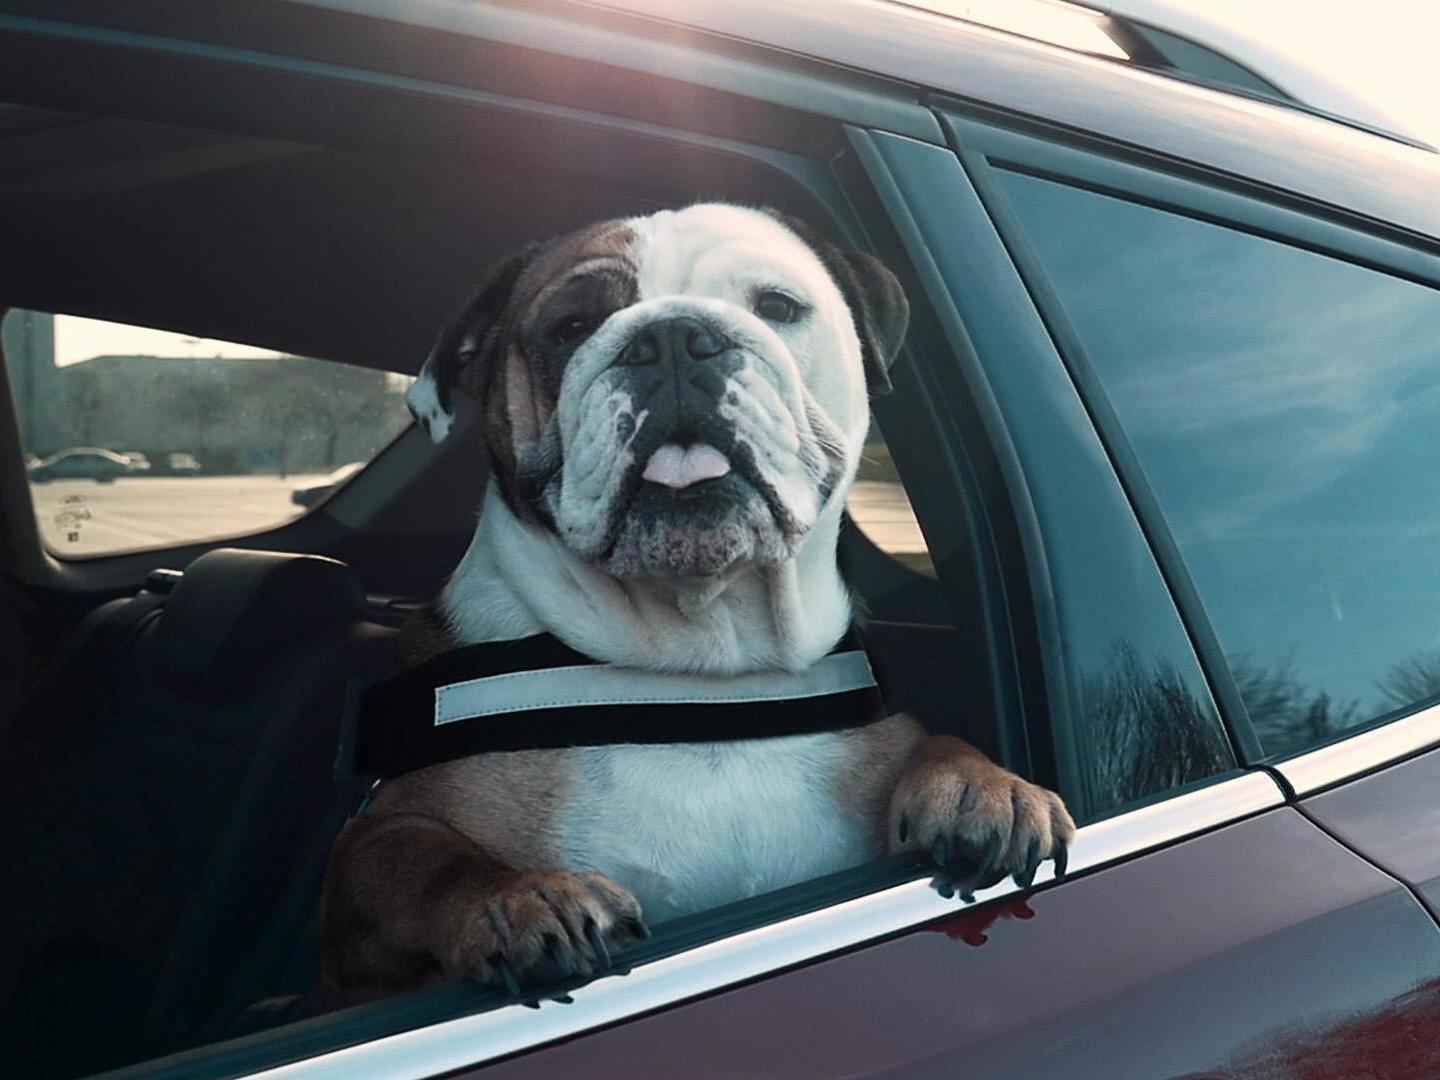 45 per cent of dog-owning drivers do not secure their pets every time they drive